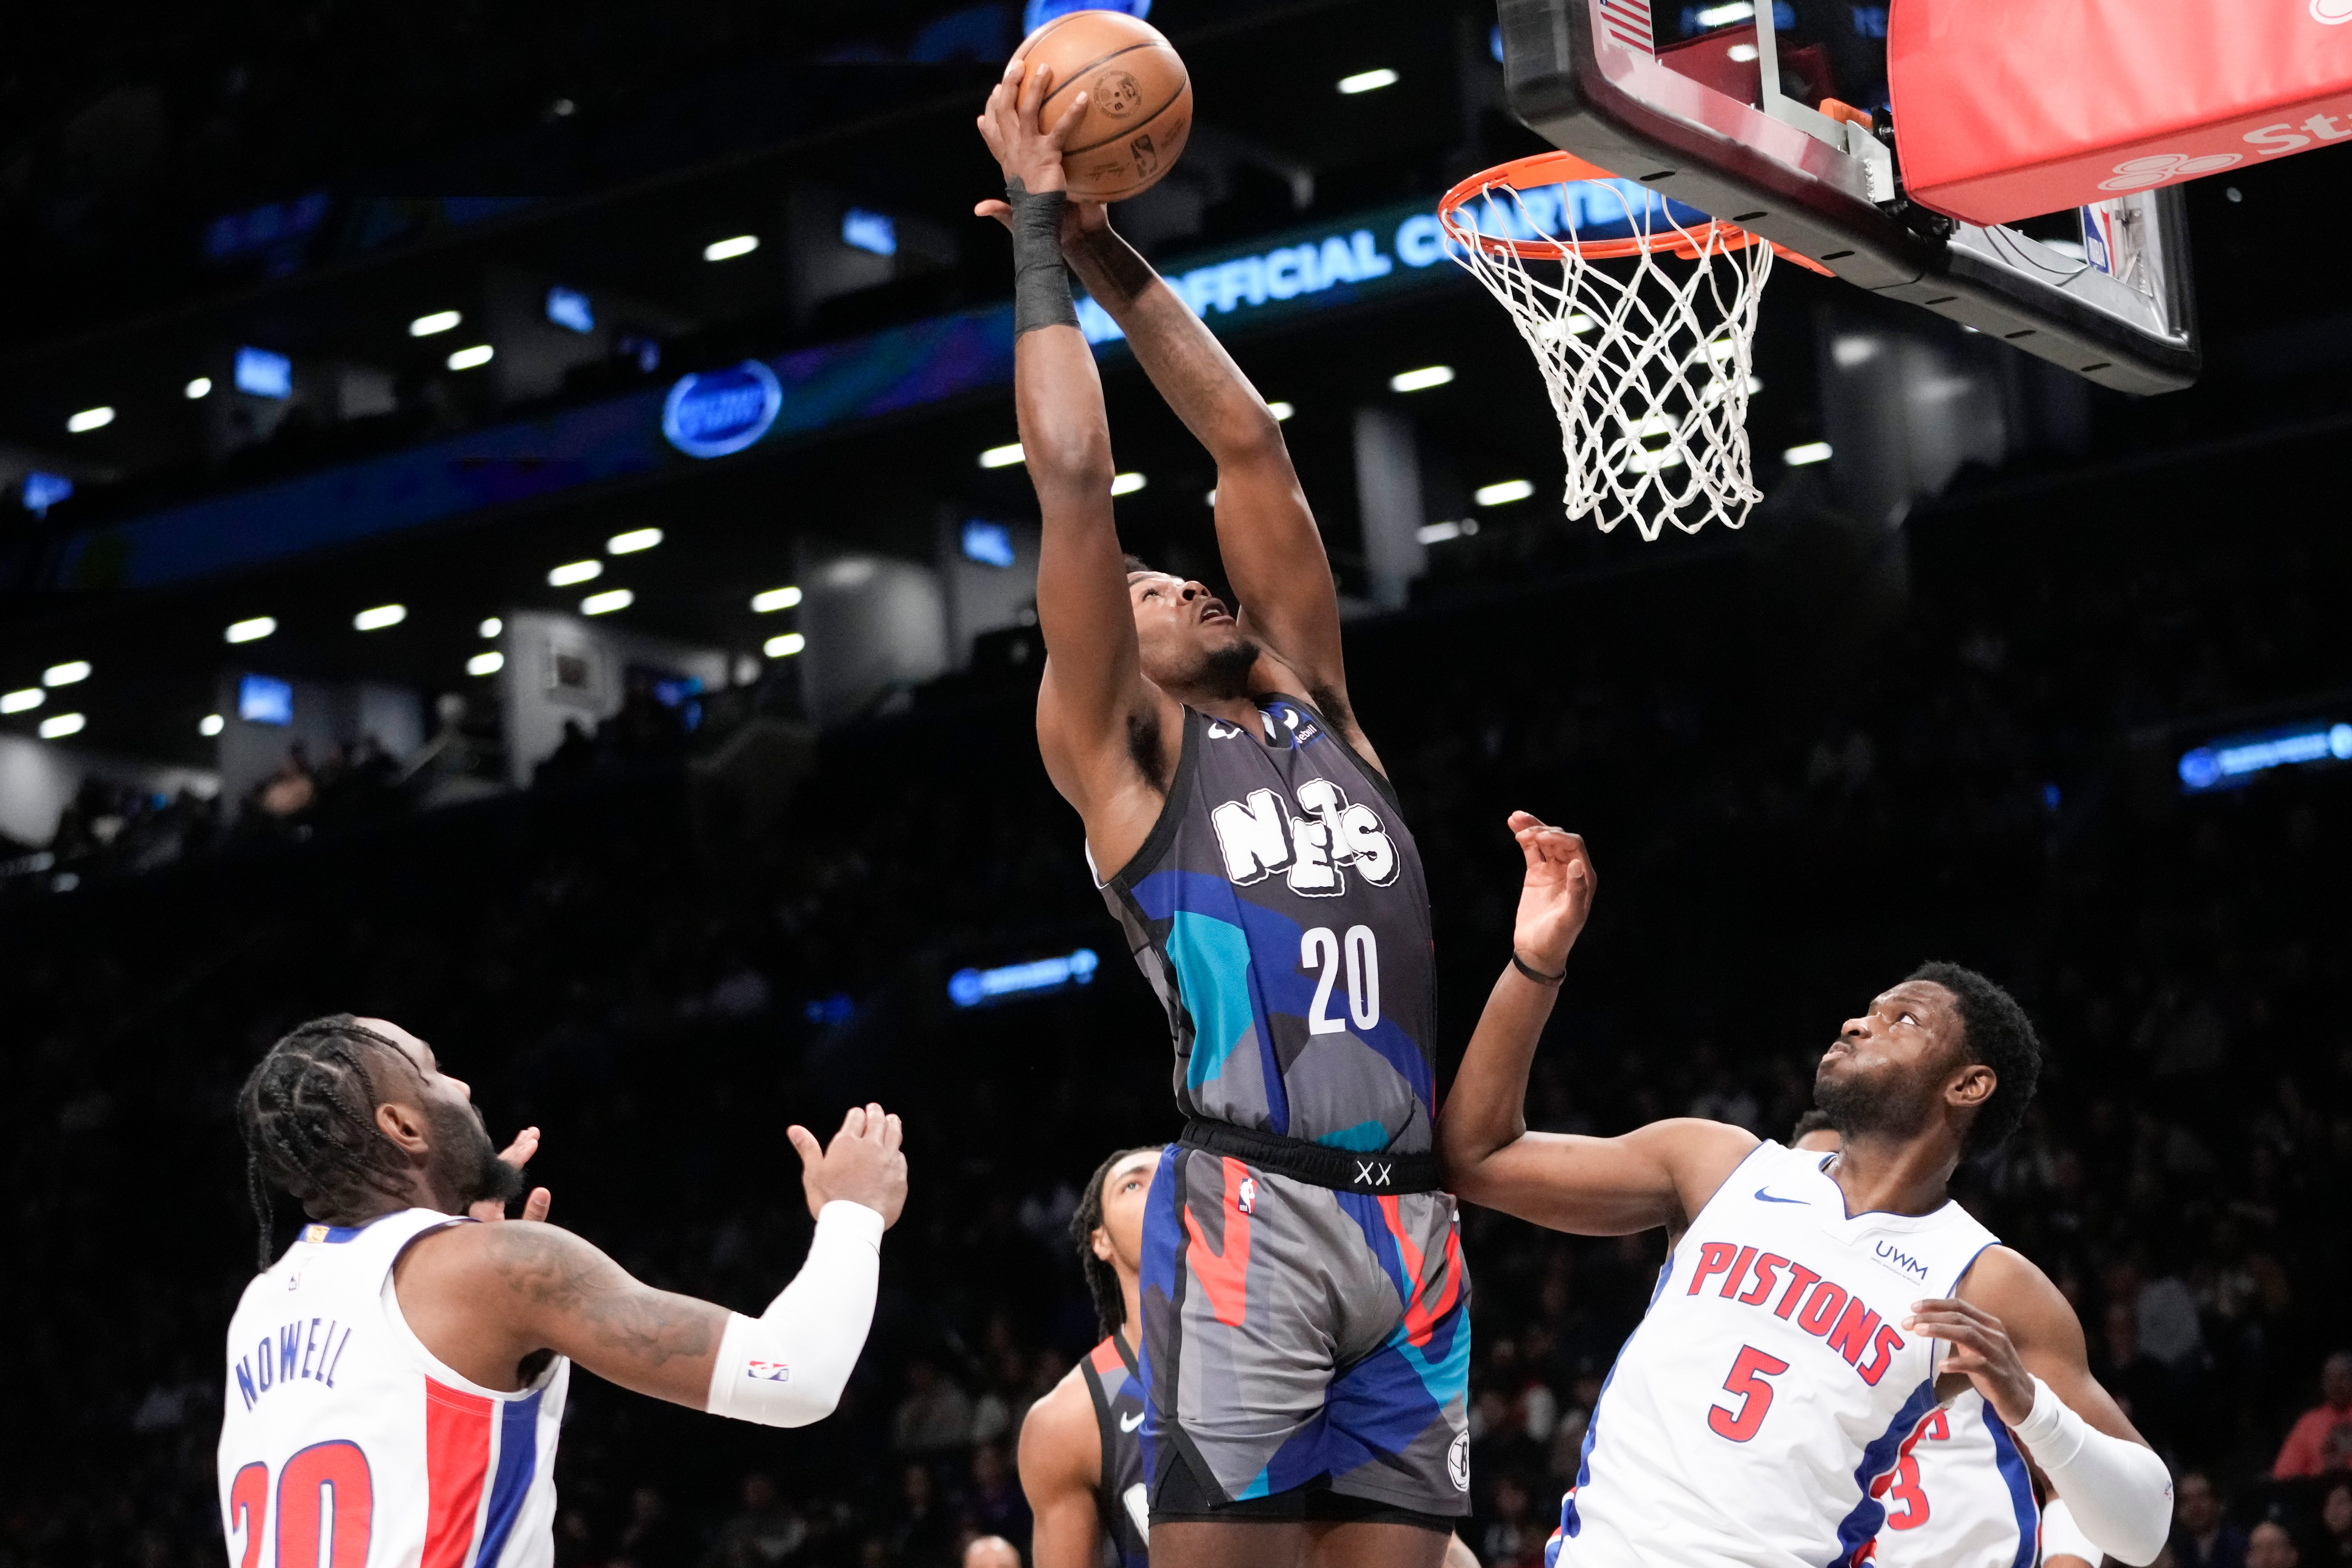 Brooklyn Nets center Day'Ron Sharpe (20) goes to the basket against Detroit Pistons guards Jaylen Nowell (5) and Jaylen Nowell, left, during the first half.